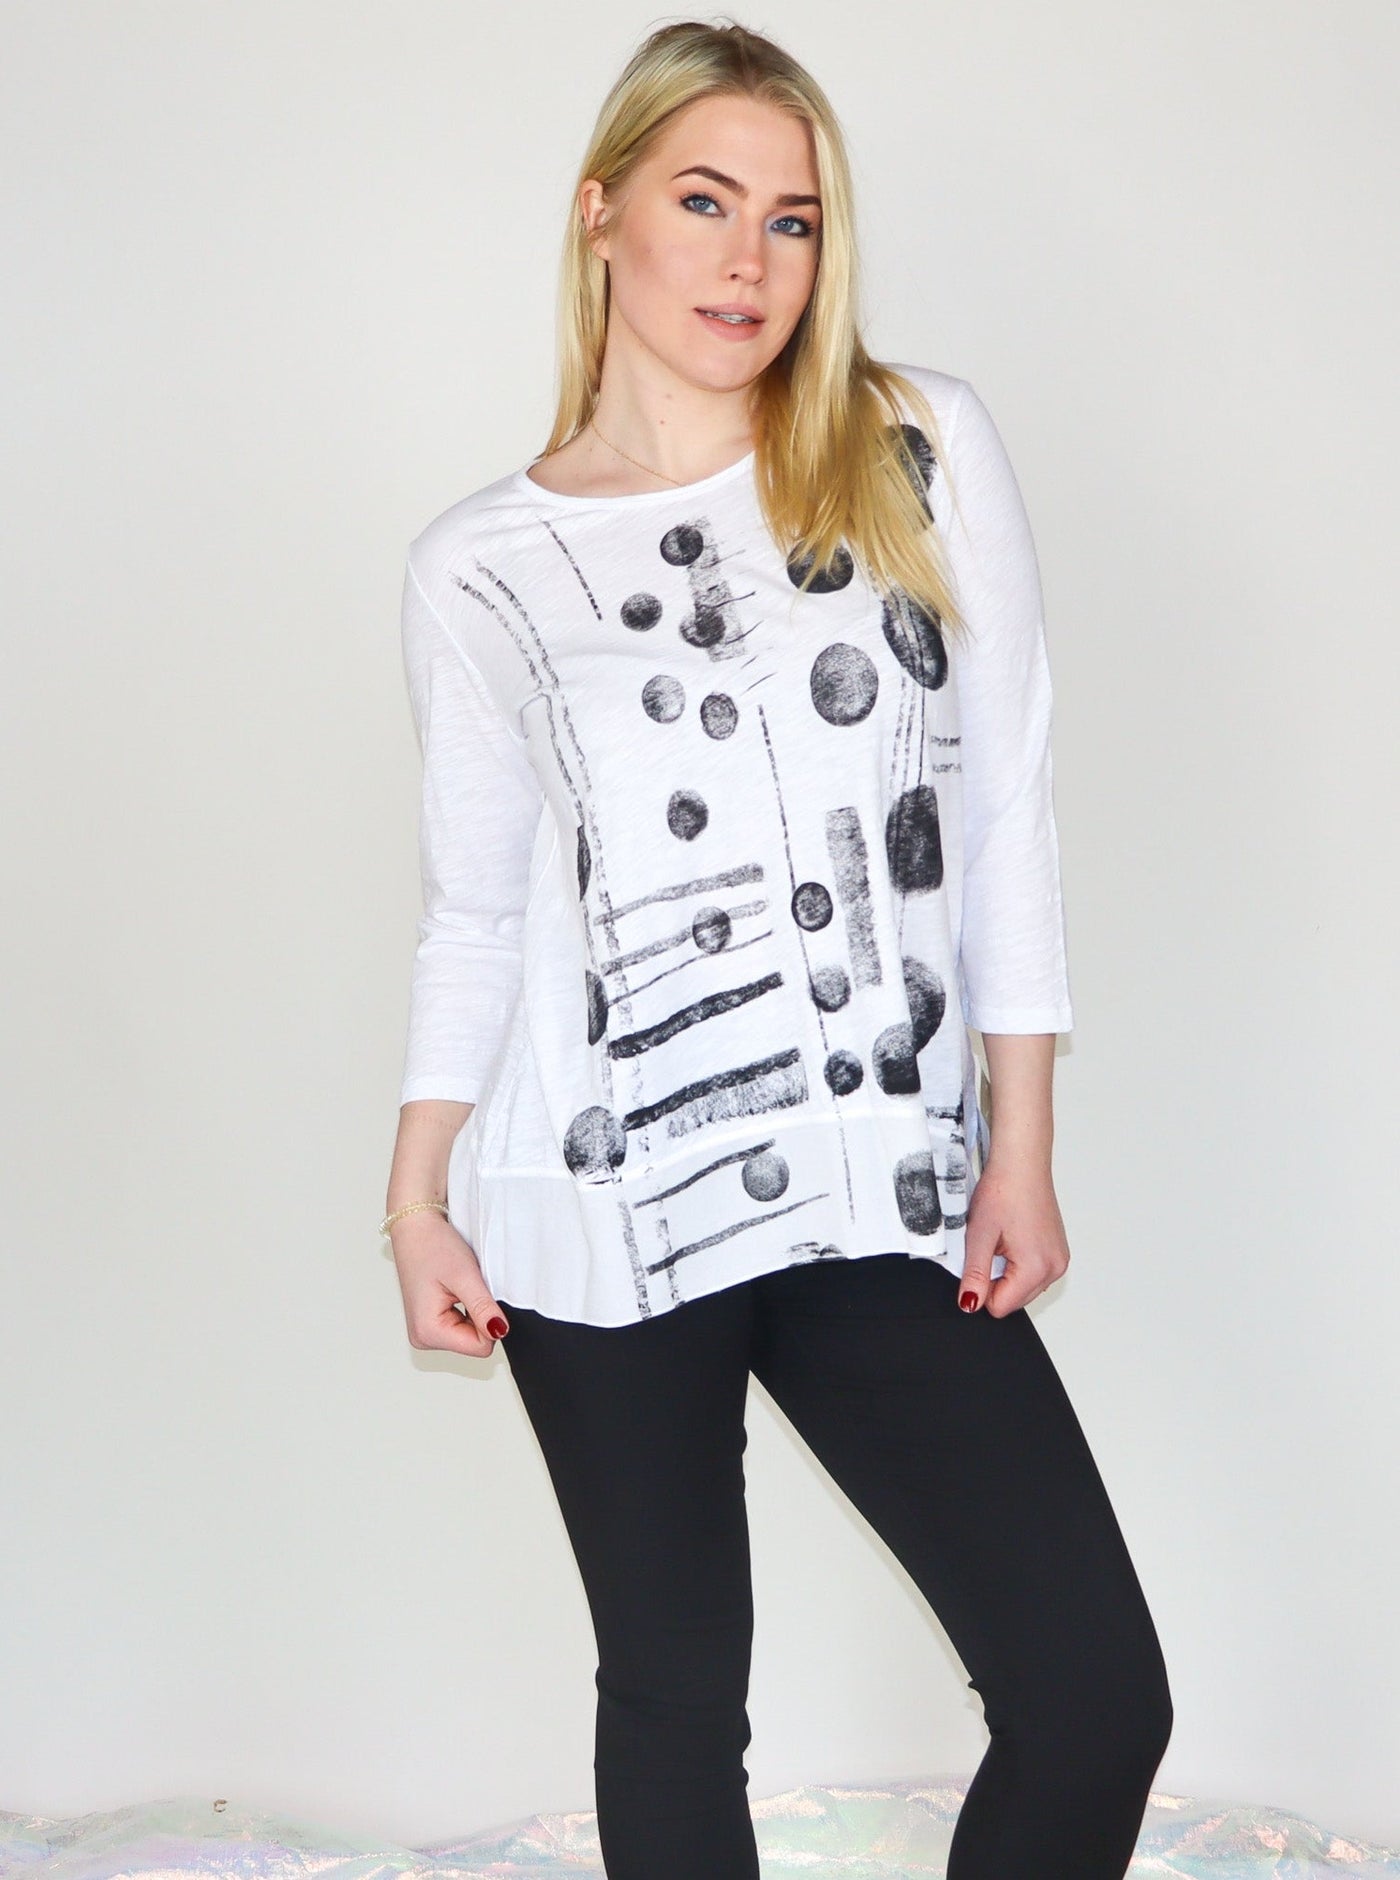 Model is wearing a white 3/4th sleeve tunic top with black abstract print. Top is paired with black skinny jeans.